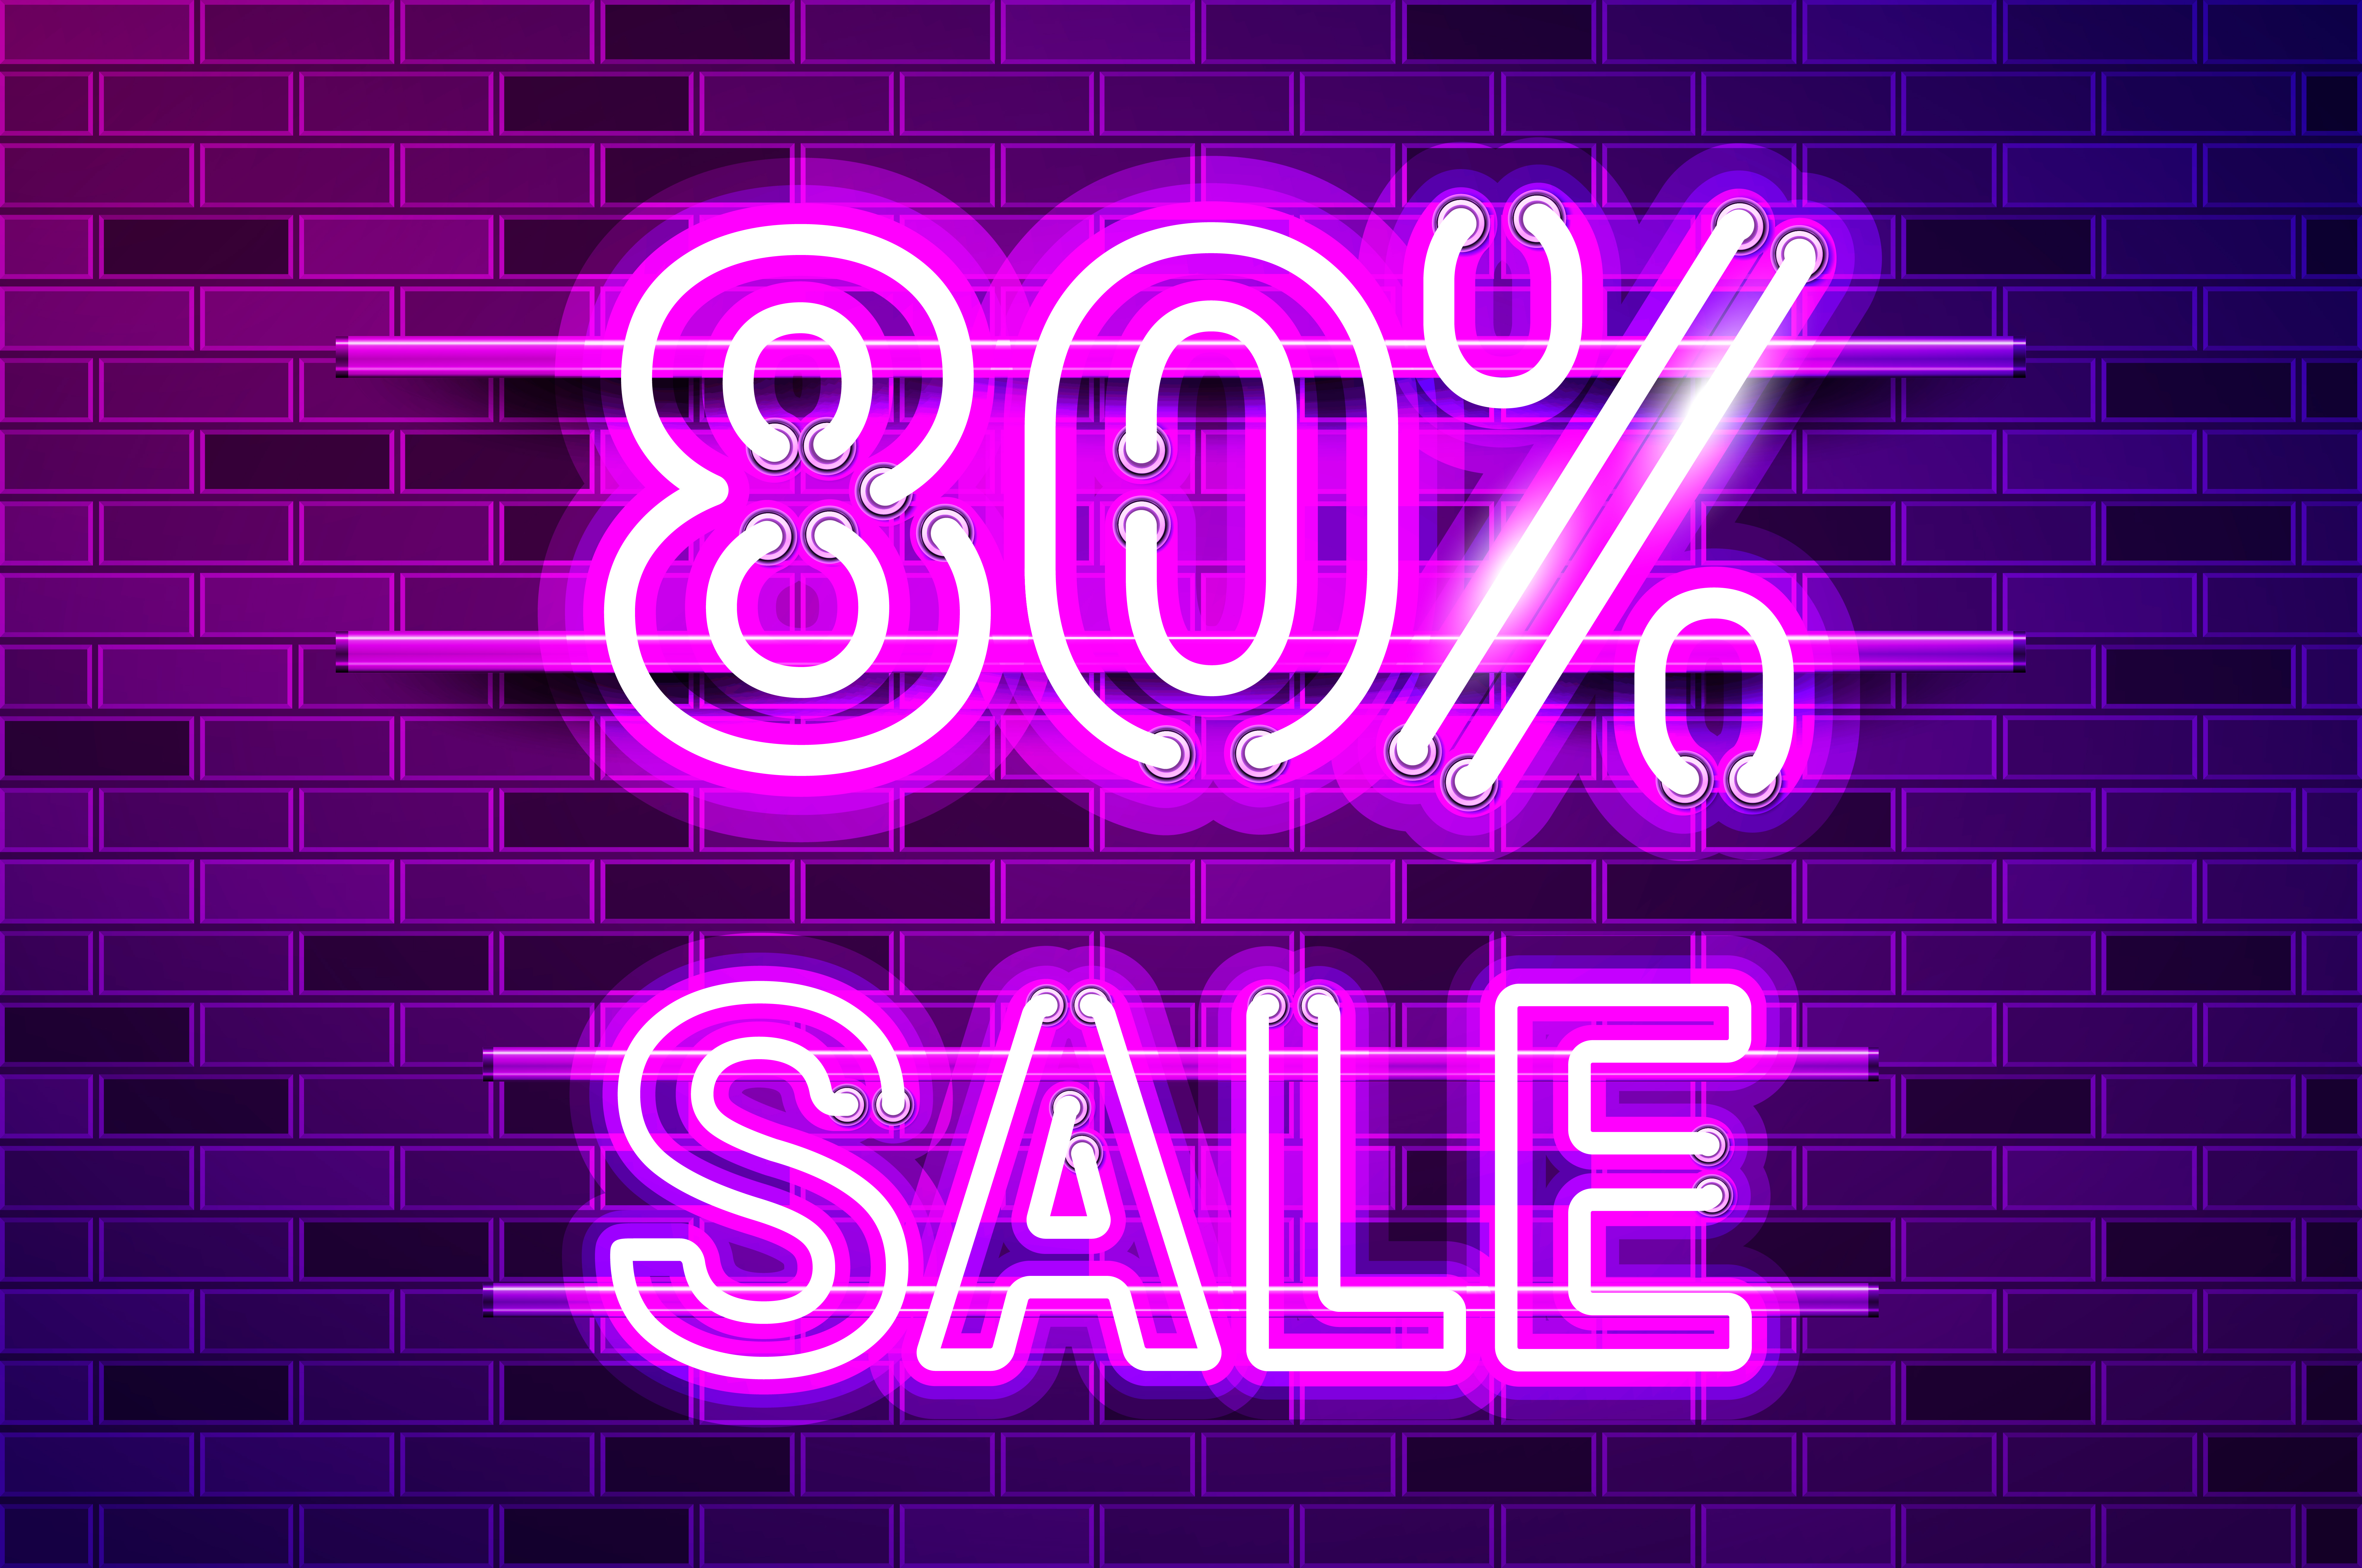 80 percent SALE glowing neon lamp sign. Realistic vector illustration. Purple brick wall, violet glow, metal holders.. 80 percent SALE glowing purple neon lamp sign